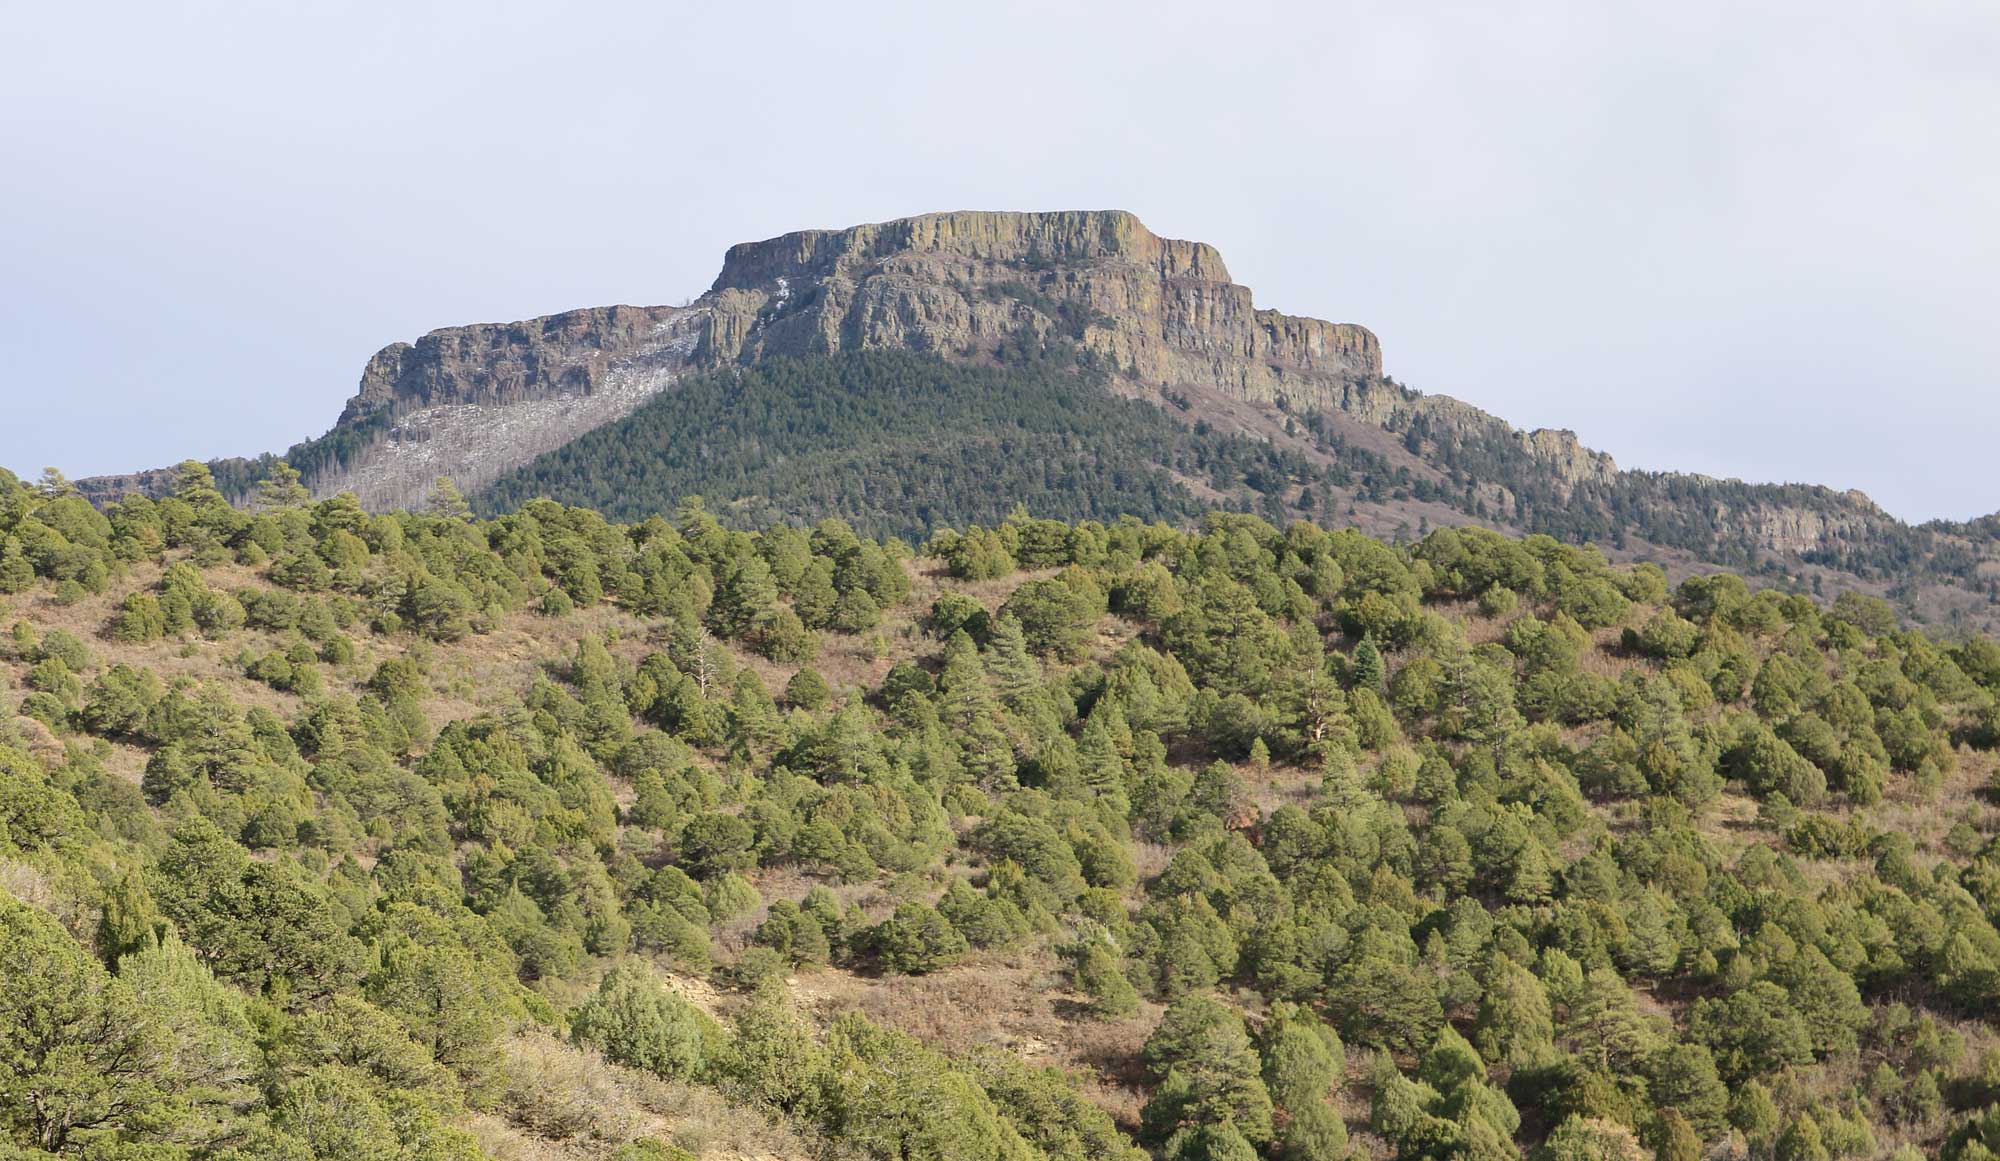 Photograph of Fishers Peak in Las Animas county, eastern Colorado. Photo shows a flat-topped mesa capped by volcanic rock. Away from the cap, the sides of the mesa slope gradually, with conifers covering the slopes.